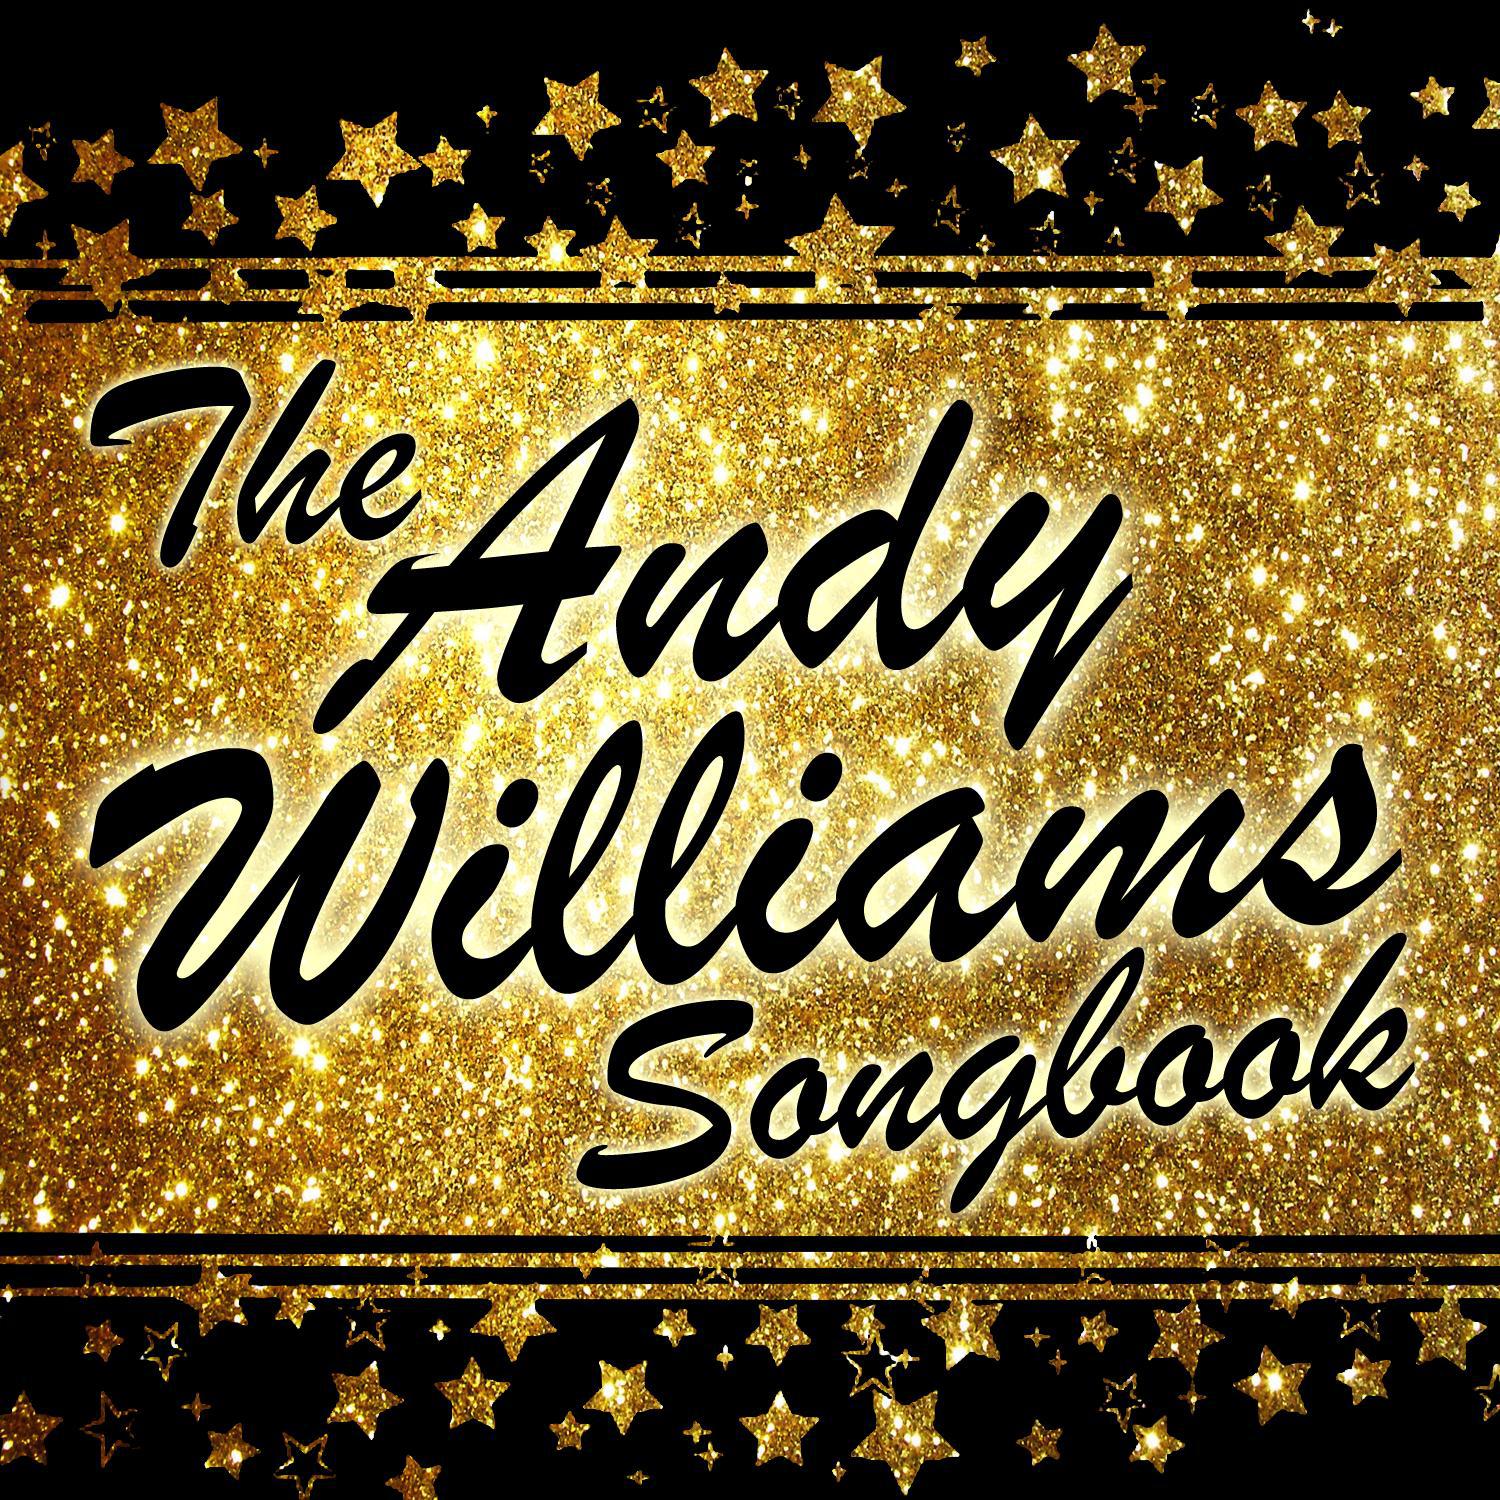 The Andy Williams Songbook